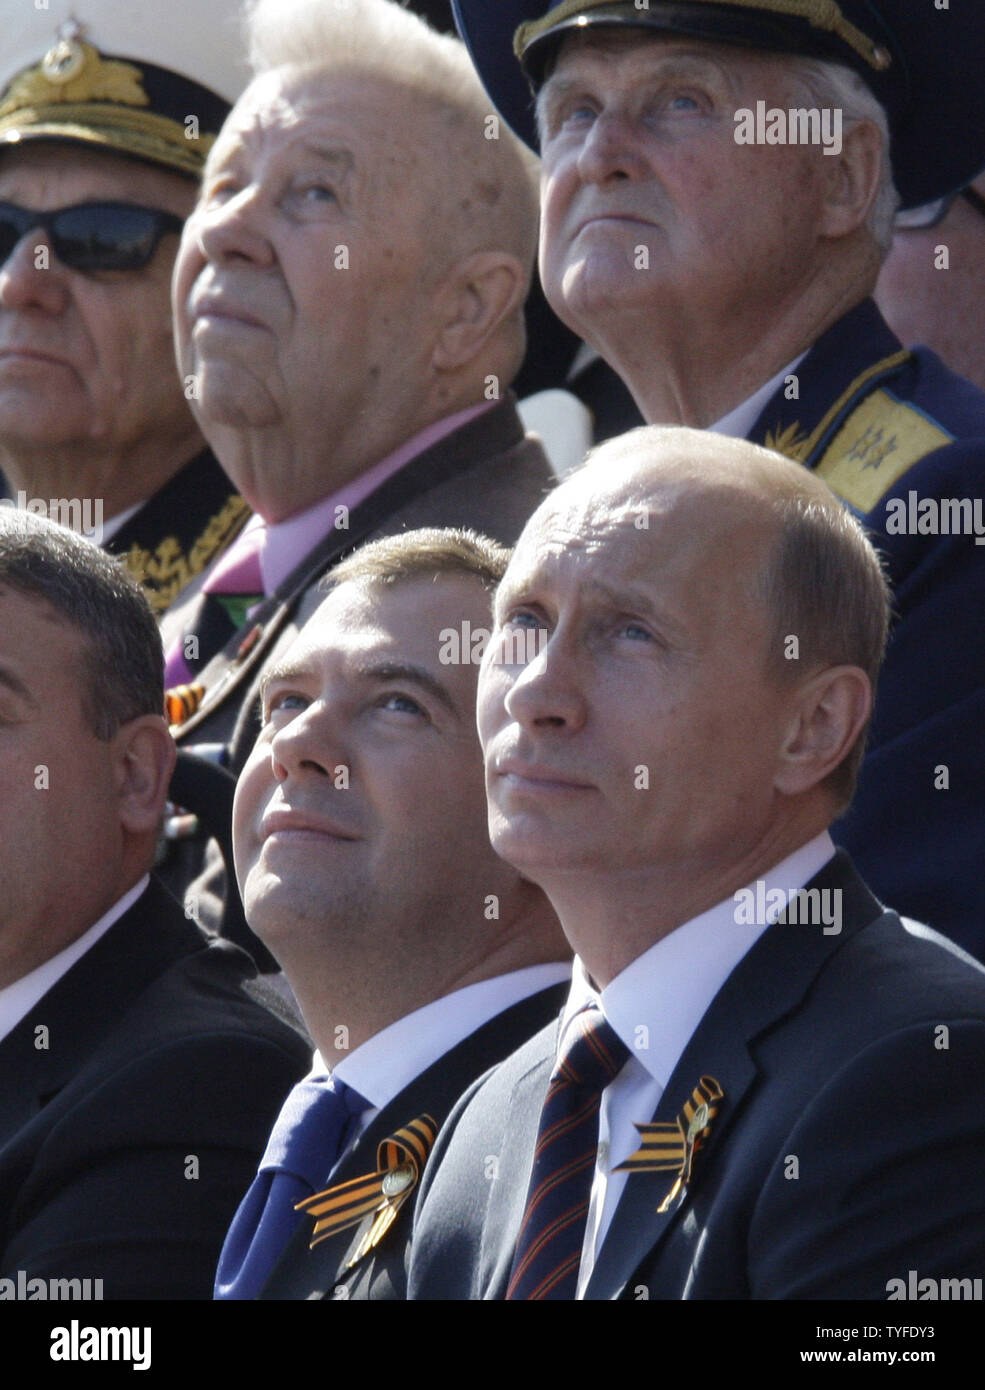 Russian President Dmitry Medvedev (L) and Prime Minister Vladimir Putin attend  the Victory Day military parade in Red Square in Moscow on May 9, 2009. Today Russia celebrates the 64th anniversary of the World War Two victory over Nazi Germany. (UPI Photo/Anatoli Zhdanov) Stock Photo